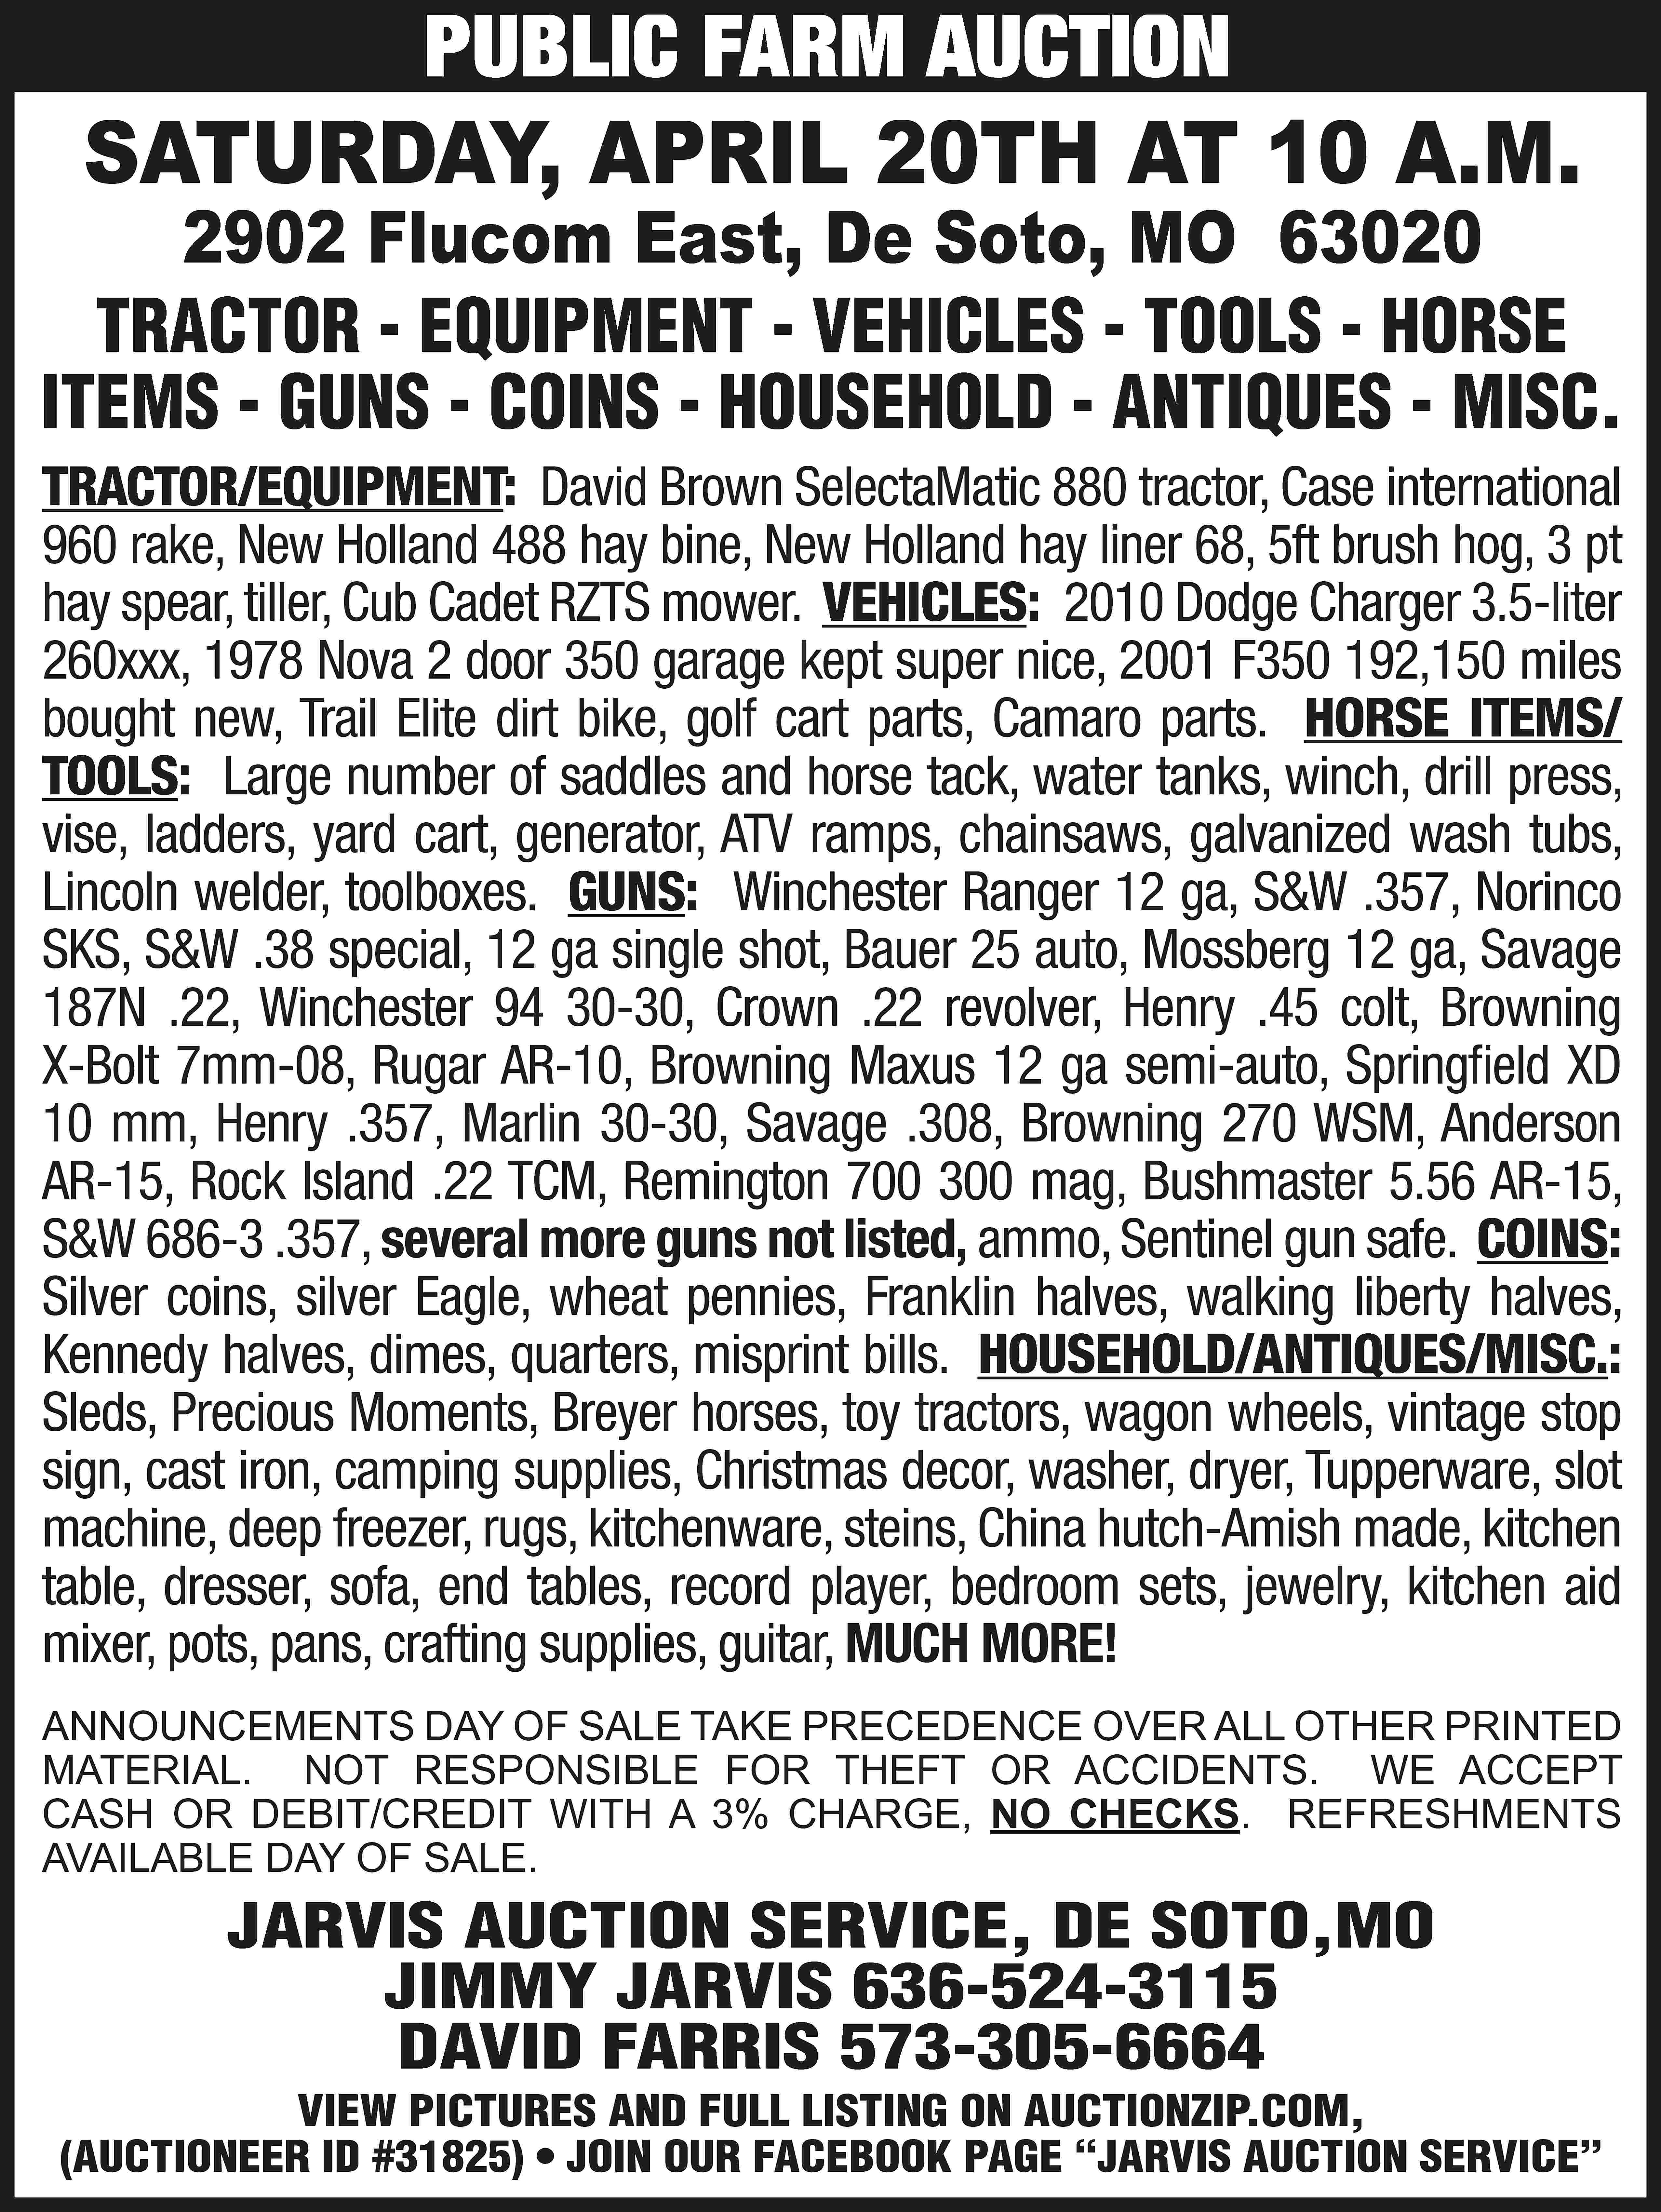 PUBLIC FARM AUCTION SATURDAY, APRIL  PUBLIC FARM AUCTION SATURDAY, APRIL 20TH AT 10 A.M. 2902 Flucom East, De Soto, MO 63020 TRACTOR - EQUIPMENT - VEHICLES - TOOLS - HORSE ITEMS - GUNS - COINS - HOUSEHOLD - ANTIQUES - MISC. TRACTOR/EQUIPMENT: David Brown SelectaMatic 880 tractor, Case international 960 rake, New Holland 488 hay bine, New Holland hay liner 68, 5ft brush hog, 3 pt hay spear, tiller, Cub Cadet RZTS mower. VEHICLES: 2010 Dodge Charger 3.5-liter 260xxx, 1978 Nova 2 door 350 garage kept super nice, 2001 F350 192,150 miles bought new, Trail Elite dirt bike, golf cart parts, Camaro parts. HORSE ITEMS/ TOOLS: Large number of saddles and horse tack, water tanks, winch, drill press, vise, ladders, yard cart, generator, ATV ramps, chainsaws, galvanized wash tubs, Lincoln welder, toolboxes. GUNS: Winchester Ranger 12 ga, S&W .357, Norinco SKS, S&W .38 special, 12 ga single shot, Bauer 25 auto, Mossberg 12 ga, Savage 187N .22, Winchester 94 30-30, Crown .22 revolver, Henry .45 colt, Browning X-Bolt 7mm-08, Rugar AR-10, Browning Maxus 12 ga semi-auto, Springfield XD 10 mm, Henry .357, Marlin 30-30, Savage .308, Browning 270 WSM, Anderson AR-15, Rock Island .22 TCM, Remington 700 300 mag, Bushmaster 5.56 AR-15, S&W 686-3 .357, several more guns not listed, ammo, Sentinel gun safe. COINS: Silver coins, silver Eagle, wheat pennies, Franklin halves, walking liberty halves, Kennedy halves, dimes, quarters, misprint bills. HOUSEHOLD/ANTIQUES/MISC.: Sleds, Precious Moments, Breyer horses, toy tractors, wagon wheels, vintage stop sign, cast iron, camping supplies, Christmas decor, washer, dryer, Tupperware, slot machine, deep freezer, rugs, kitchenware, steins, China hutch-Amish made, kitchen table, dresser, sofa, end tables, record player, bedroom sets, jewelry, kitchen aid mixer, pots, pans, crafting supplies, guitar, MUCH MORE! ANNOUNCEMENTS DAY OF SALE TAKE PRECEDENCE OVER ALL OTHER PRINTED MATERIAL. NOT RESPONSIBLE FOR THEFT OR ACCIDENTS. WE ACCEPT CASH OR DEBIT/CREDIT WITH A 3% CHARGE, NO CHECKS. REFRESHMENTS AVAILABLE DAY OF SALE. JARVIS AUCTION SERVICE, DE SOTO,MO JIMMY JARVIS 636-524-3115 DAVID FARRIS 573-305-6664 VIEW PICTURES AND FULL LISTING ON AUCTIONZIP.COM, (AUCTIONEER ID #31825) • JOIN OUR FACEBOOK PAGE “JARVIS AUCTION SERVICE”